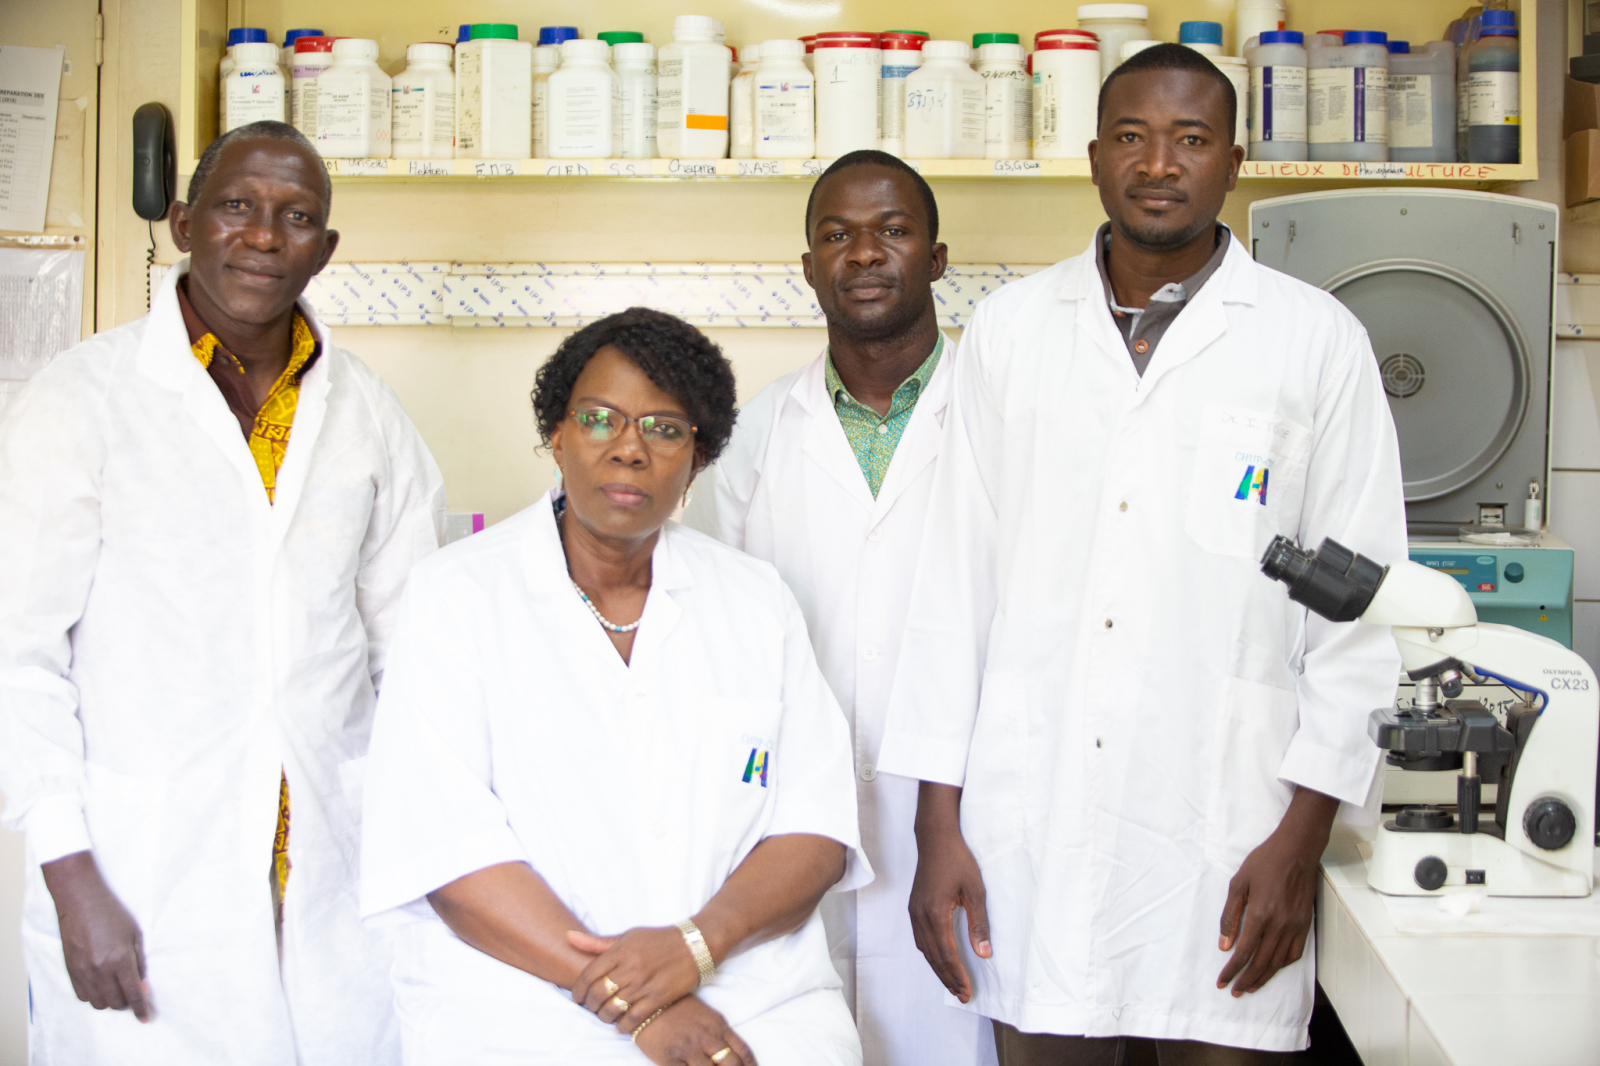 Rasmata with members of her laboratory, R to L : Mamadou Tamboura, Rasmata, Mamadou Baduon and Issa Tonde. (Photograph by Serge Ismael Ouédraogo, HID)